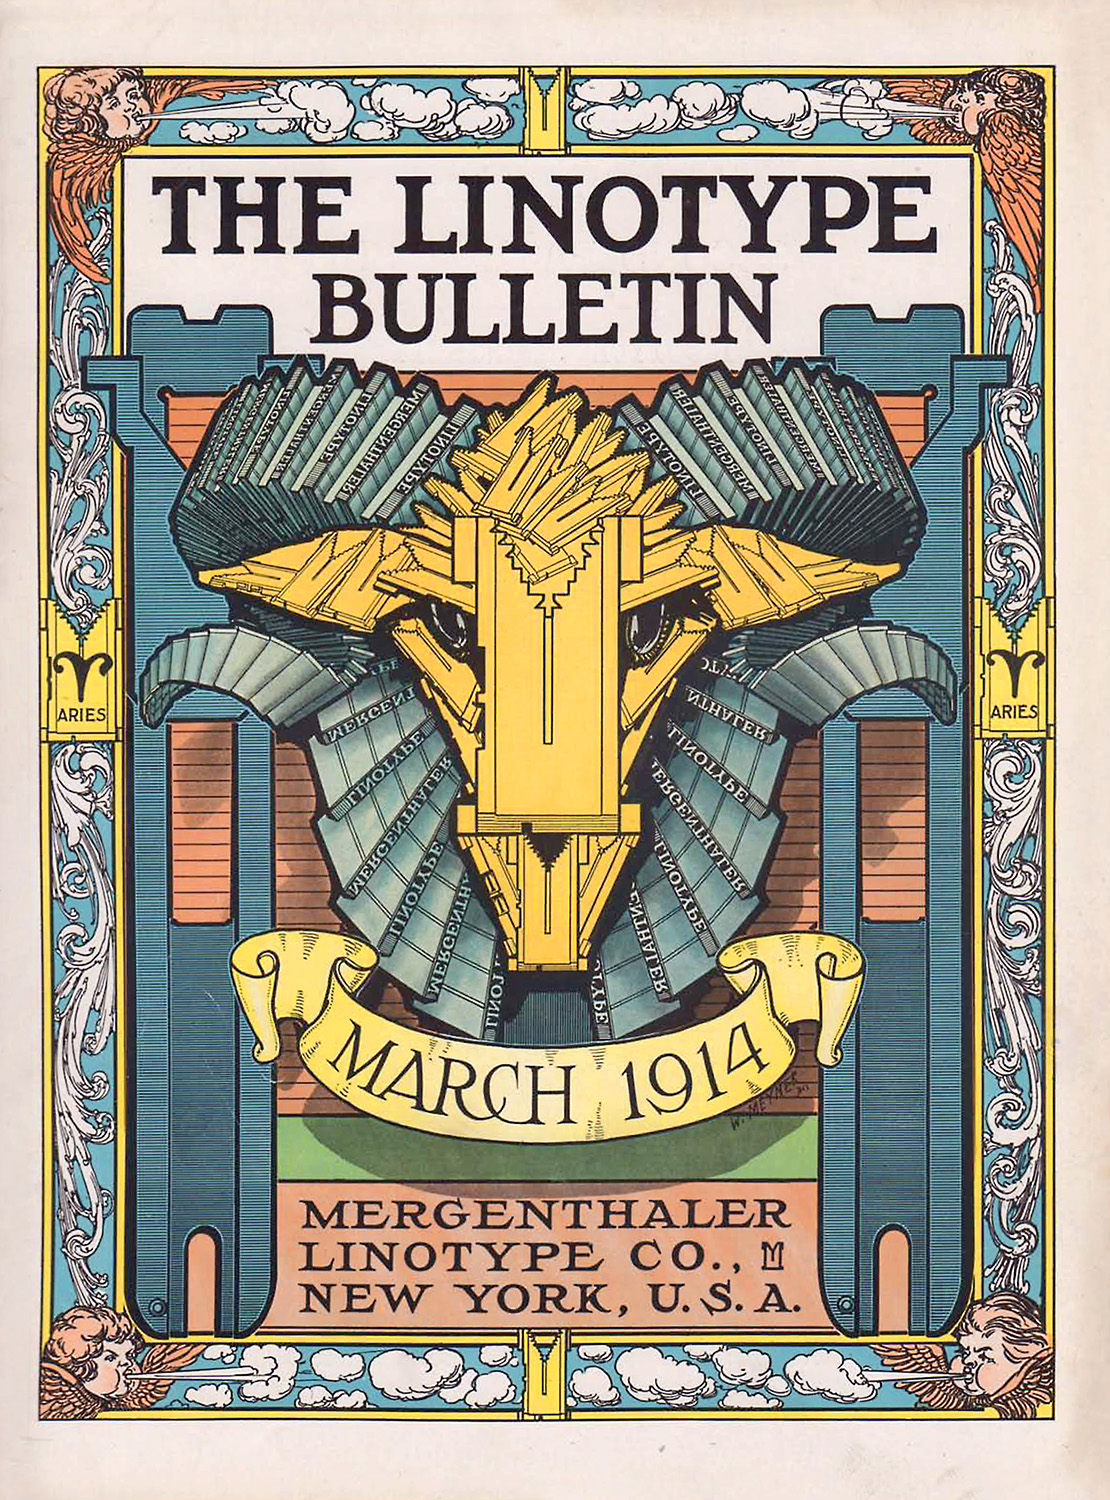 The Linotype Bulletin from March, 1914 has one of the most amazing  covers I’ve ever seen in my entire life